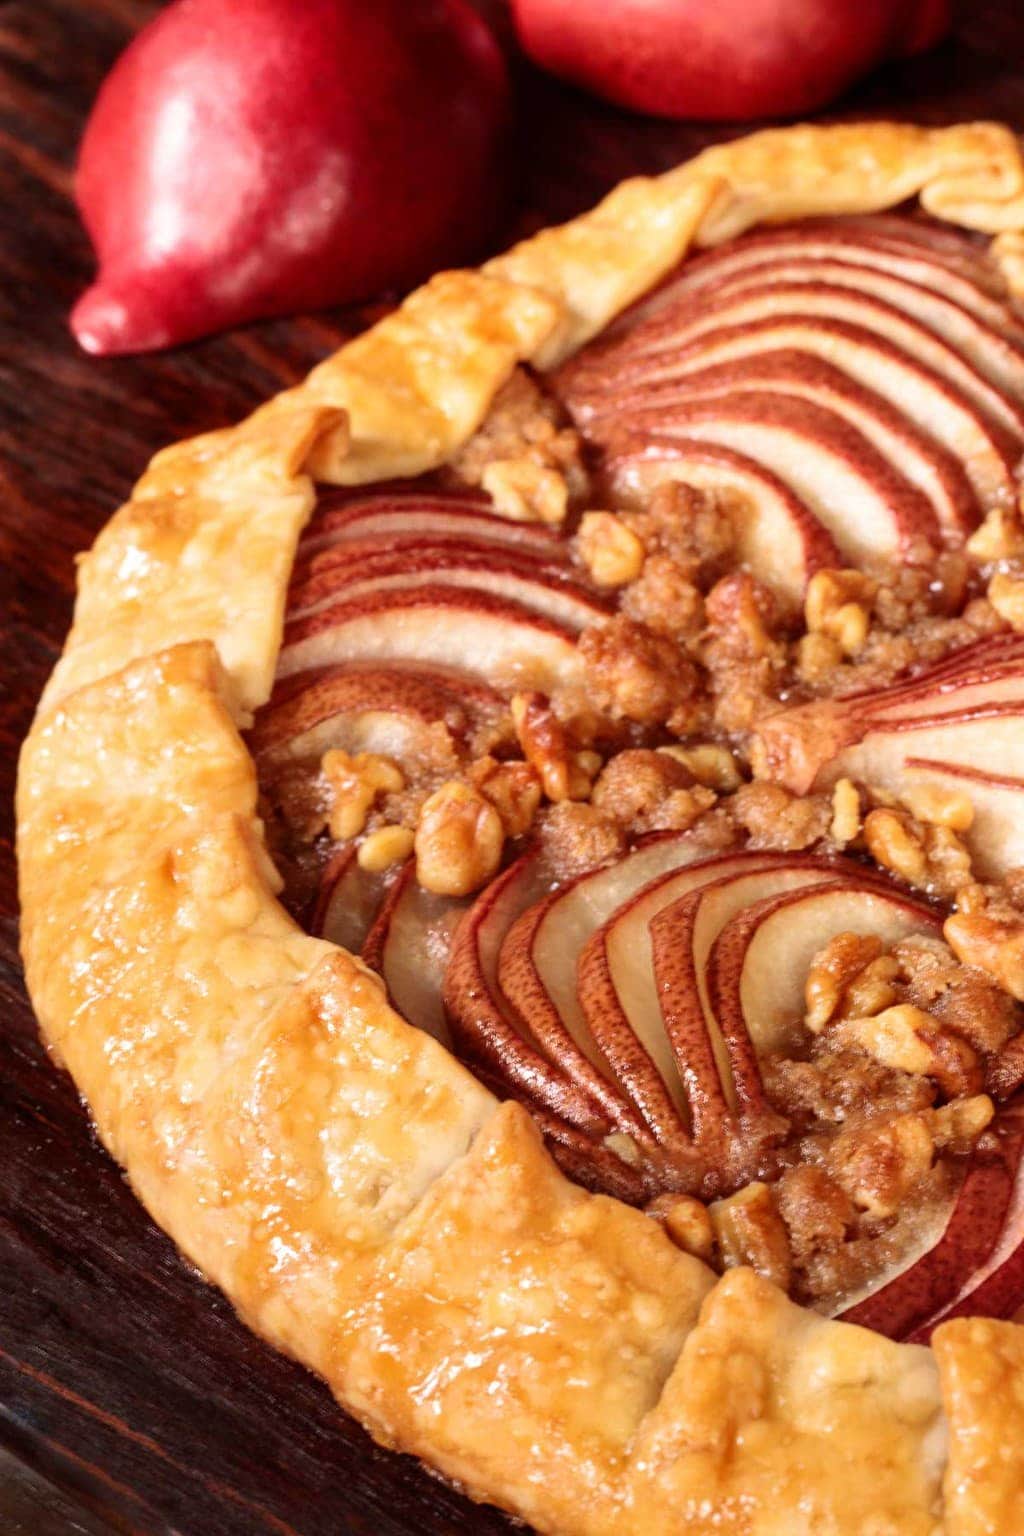 Close up photo of a Maple-Glazed Red Pear Galette on a wood table with red pears in the background.